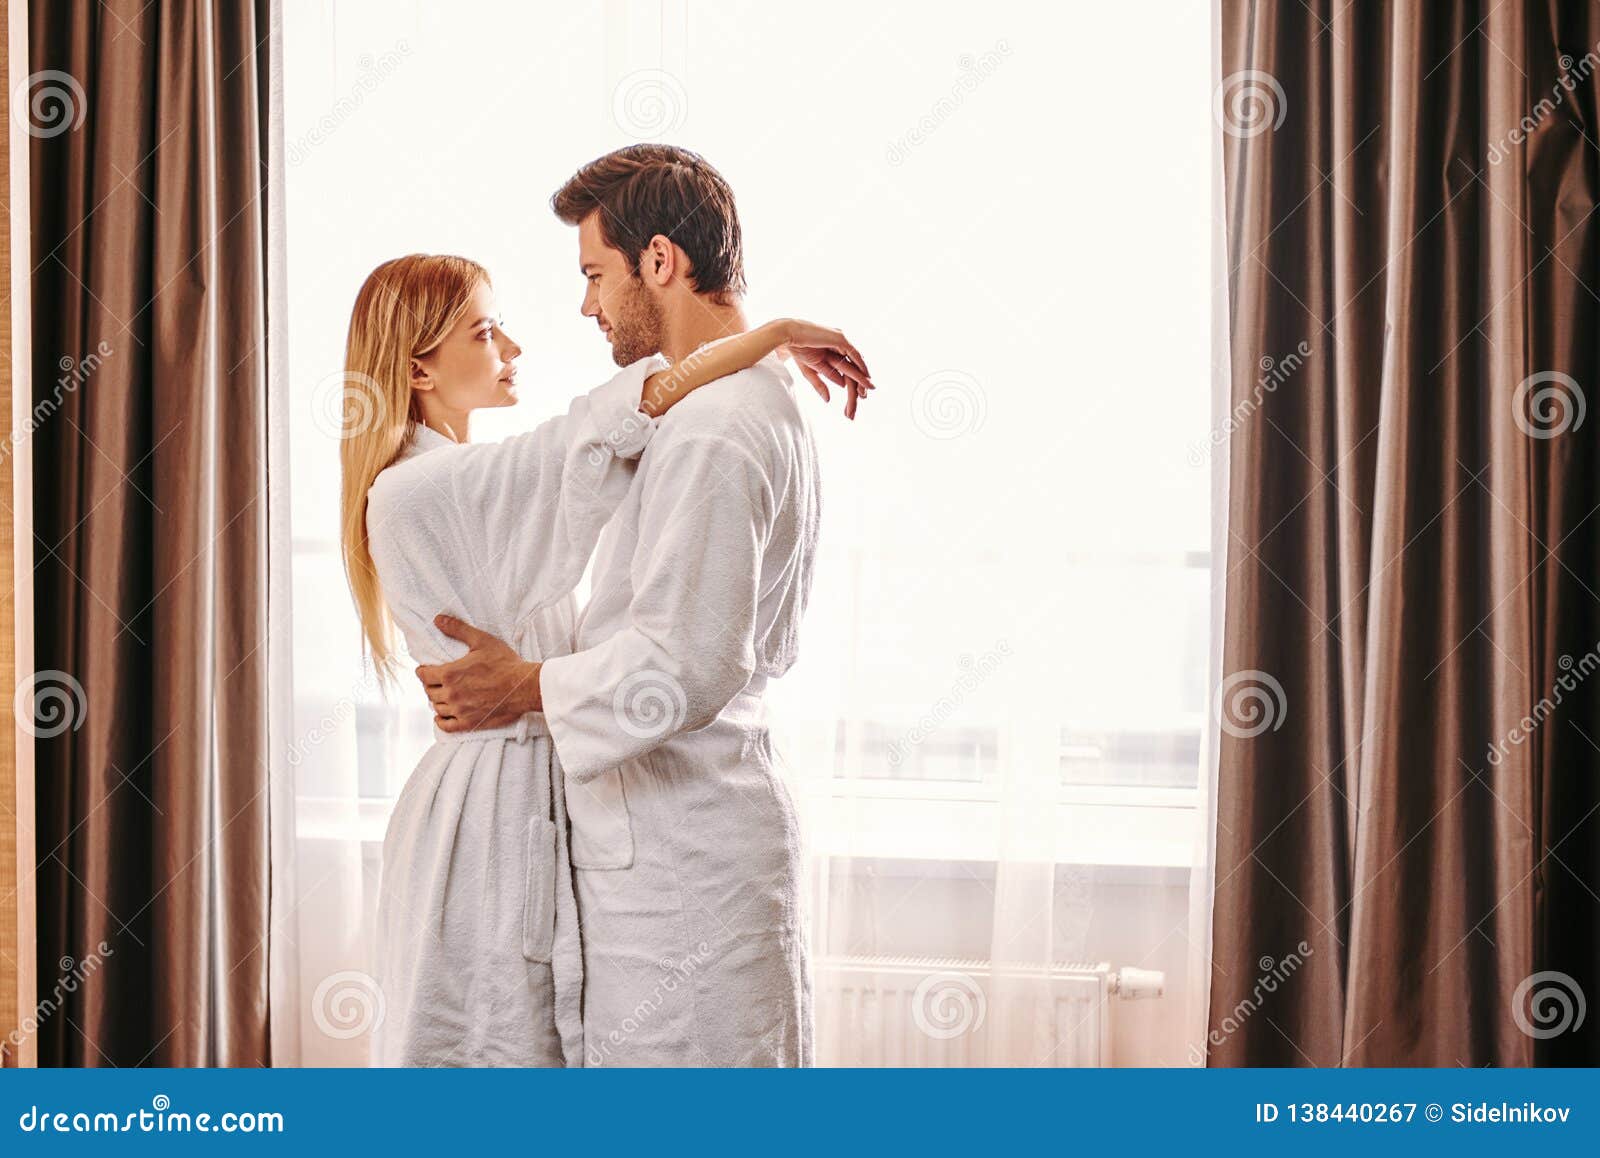 Longtime Relationships Young Couple Travel Together Hotel Room Leisure